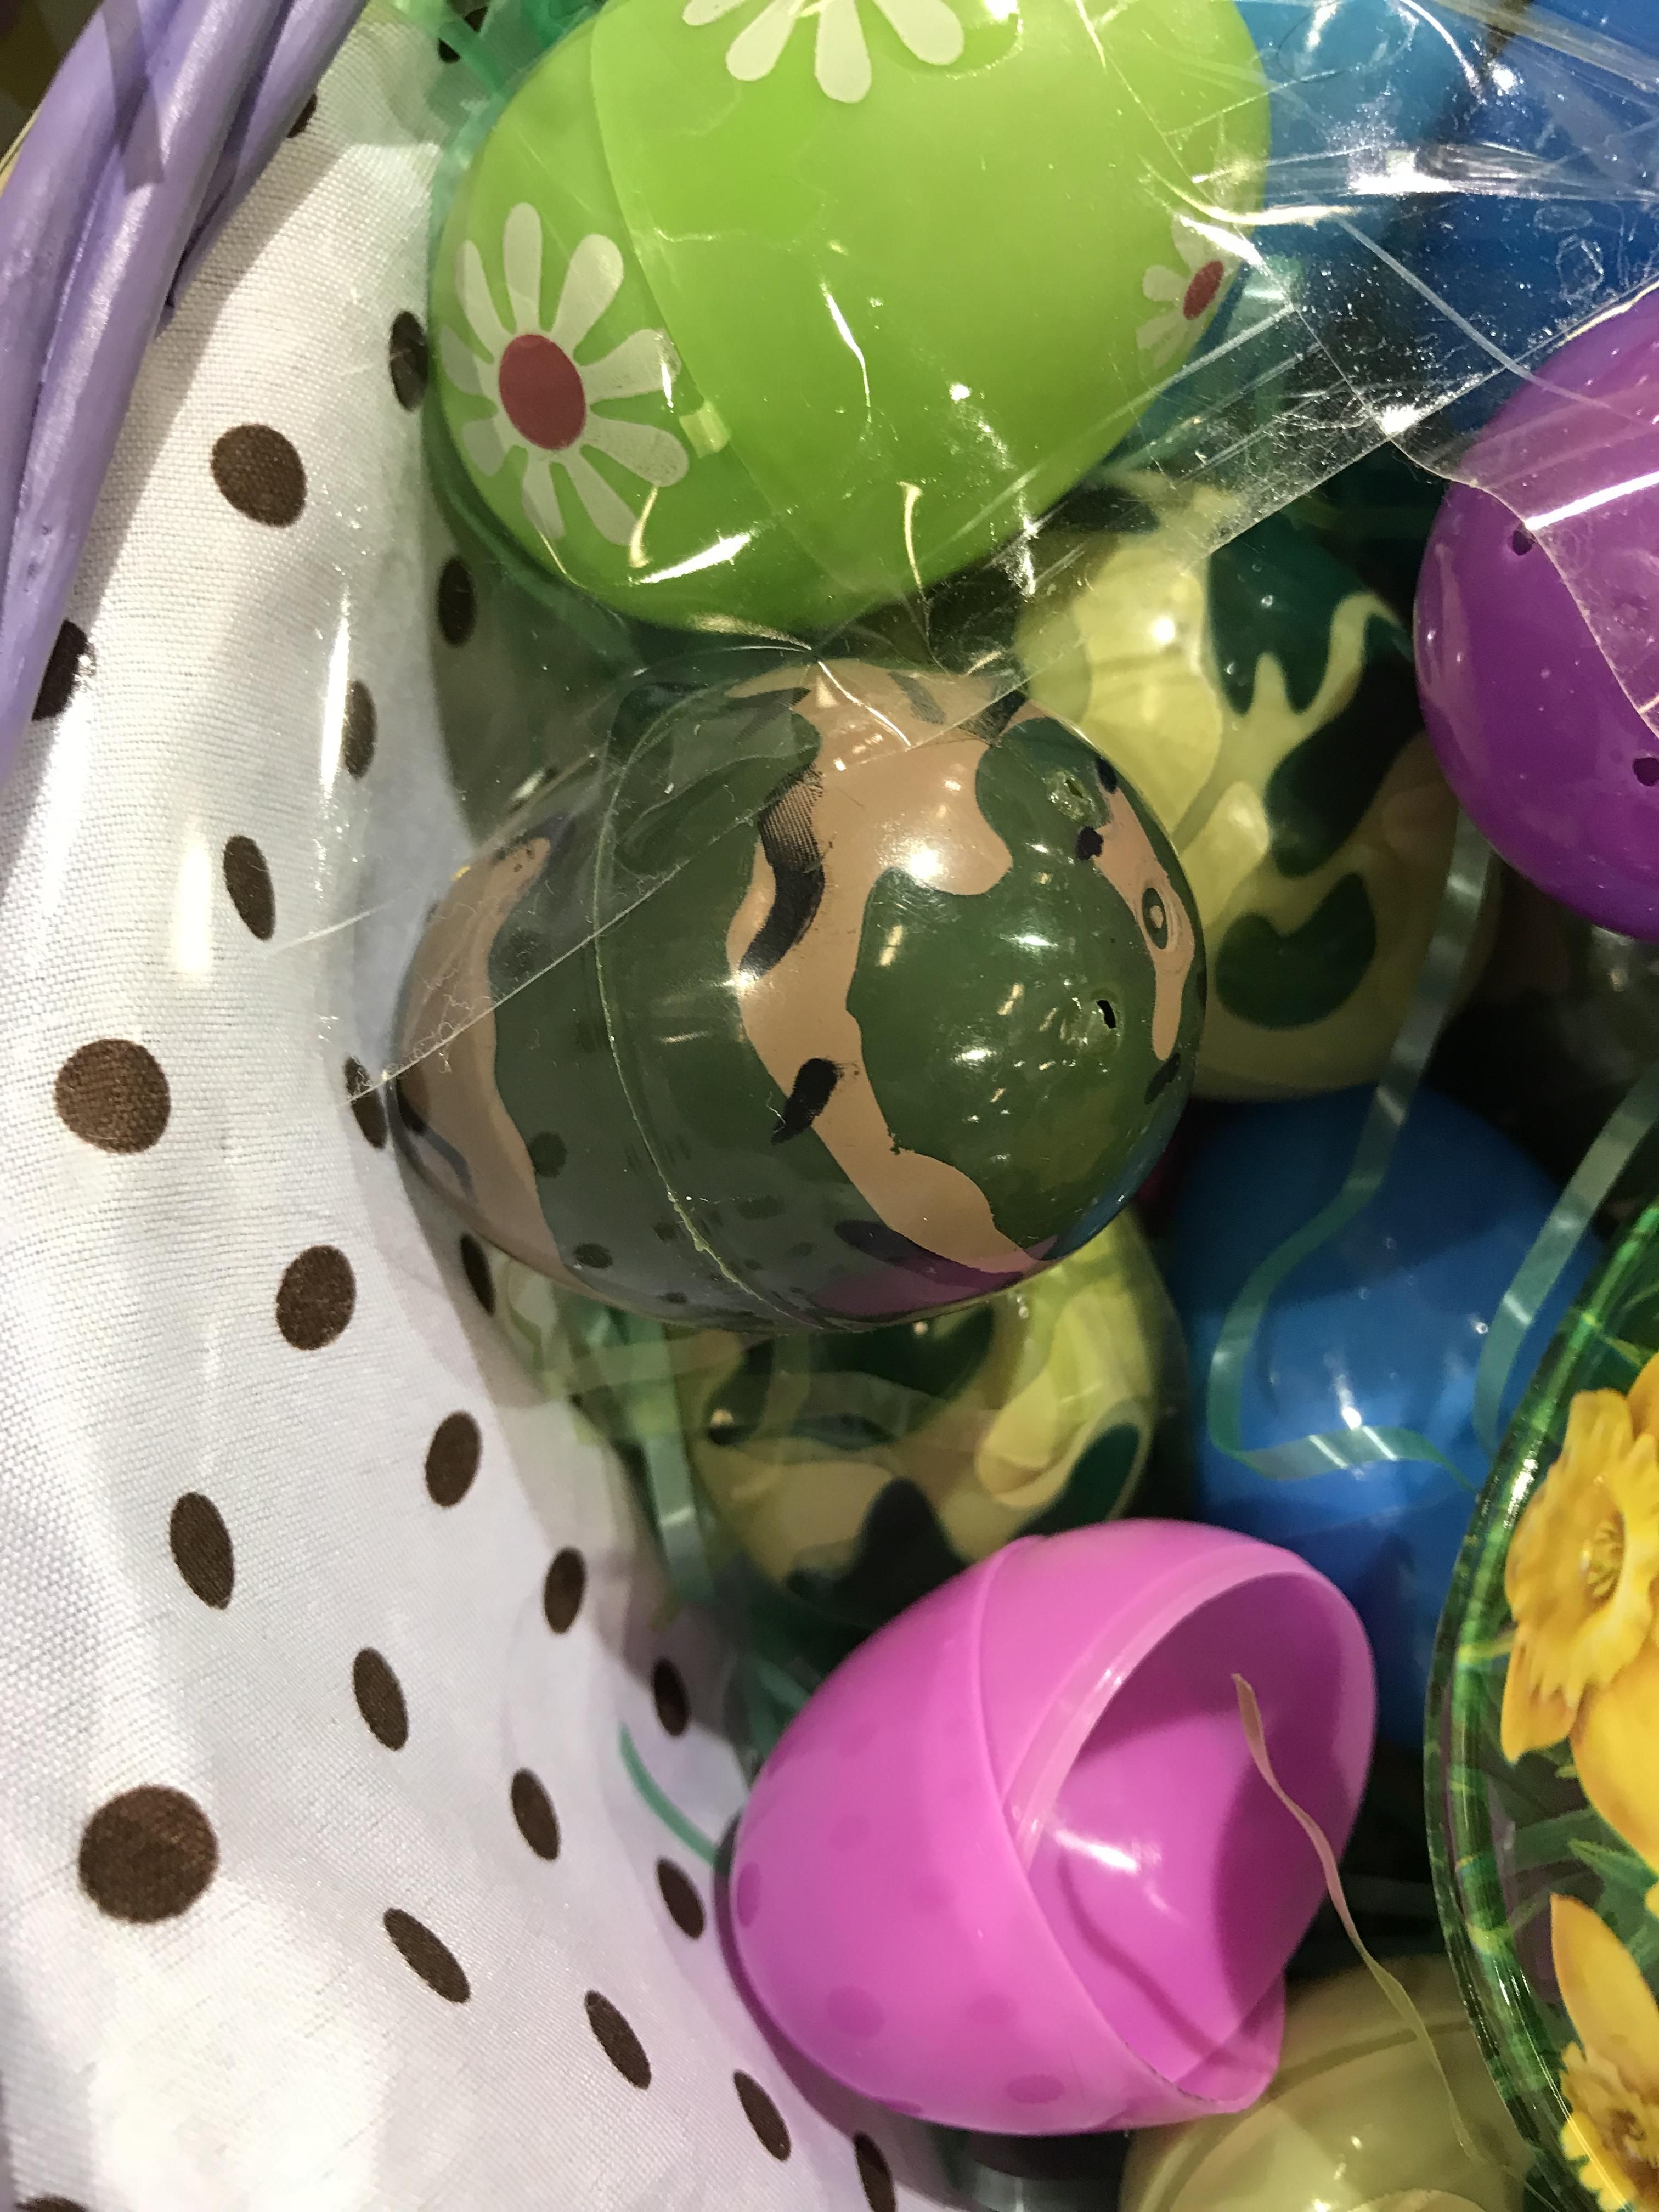 What heartless *** invented camouflage Easter eggs?